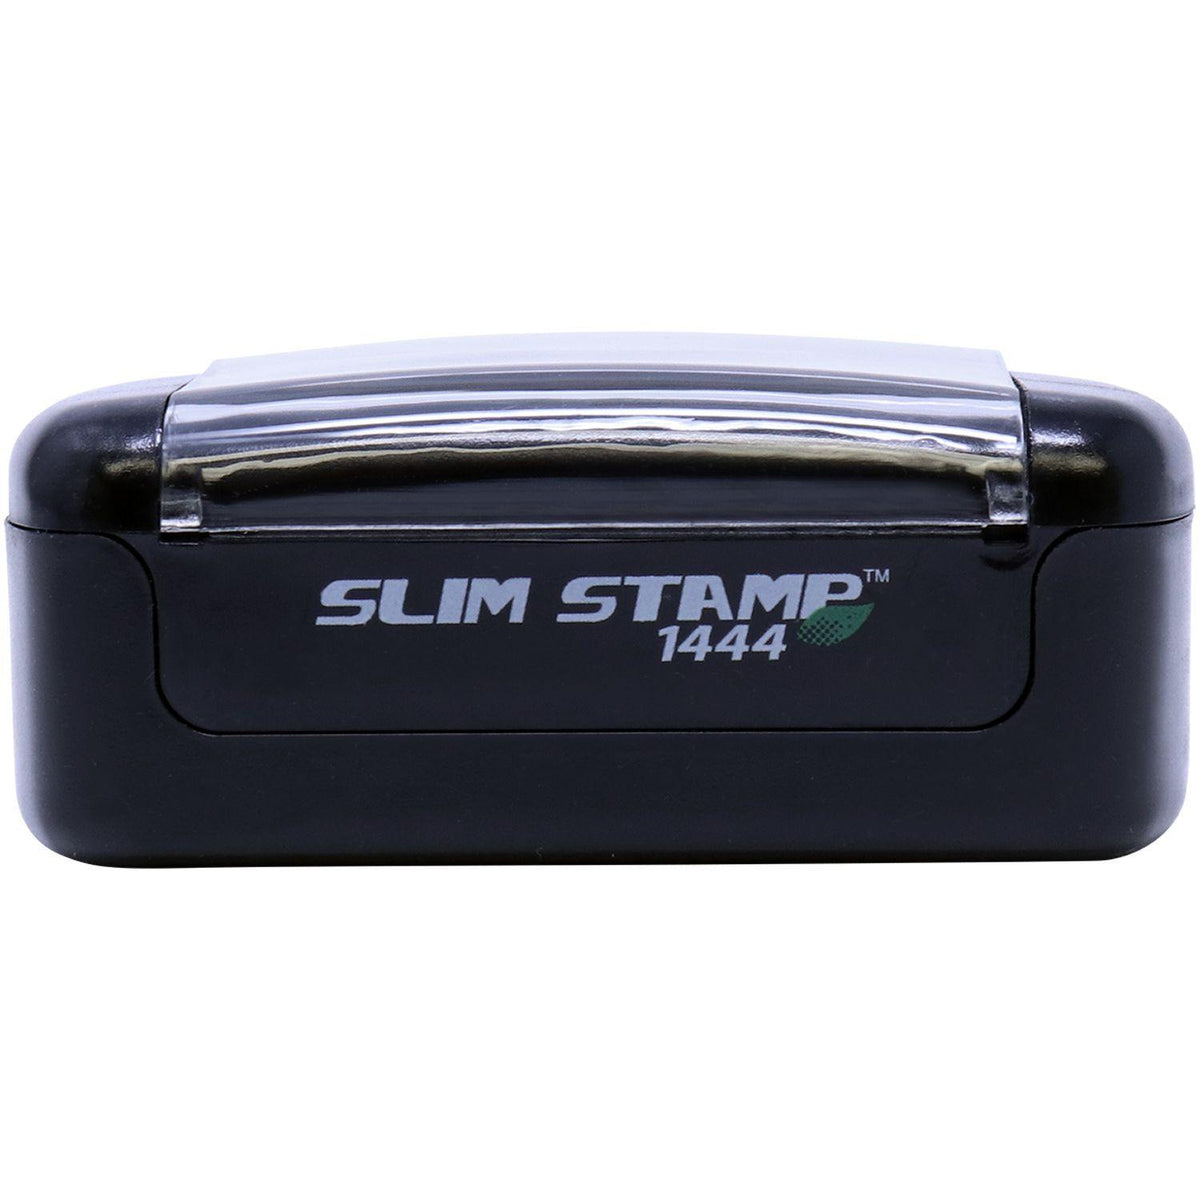 Slim Pre-Inked Box Closed No Order Stamp - Engineer Seal Stamps - Brand_Slim, Impression Size_Small, Stamp Type_Pre-Inked Stamp, Type of Use_Office, Type of Use_Postal &amp; Mailing